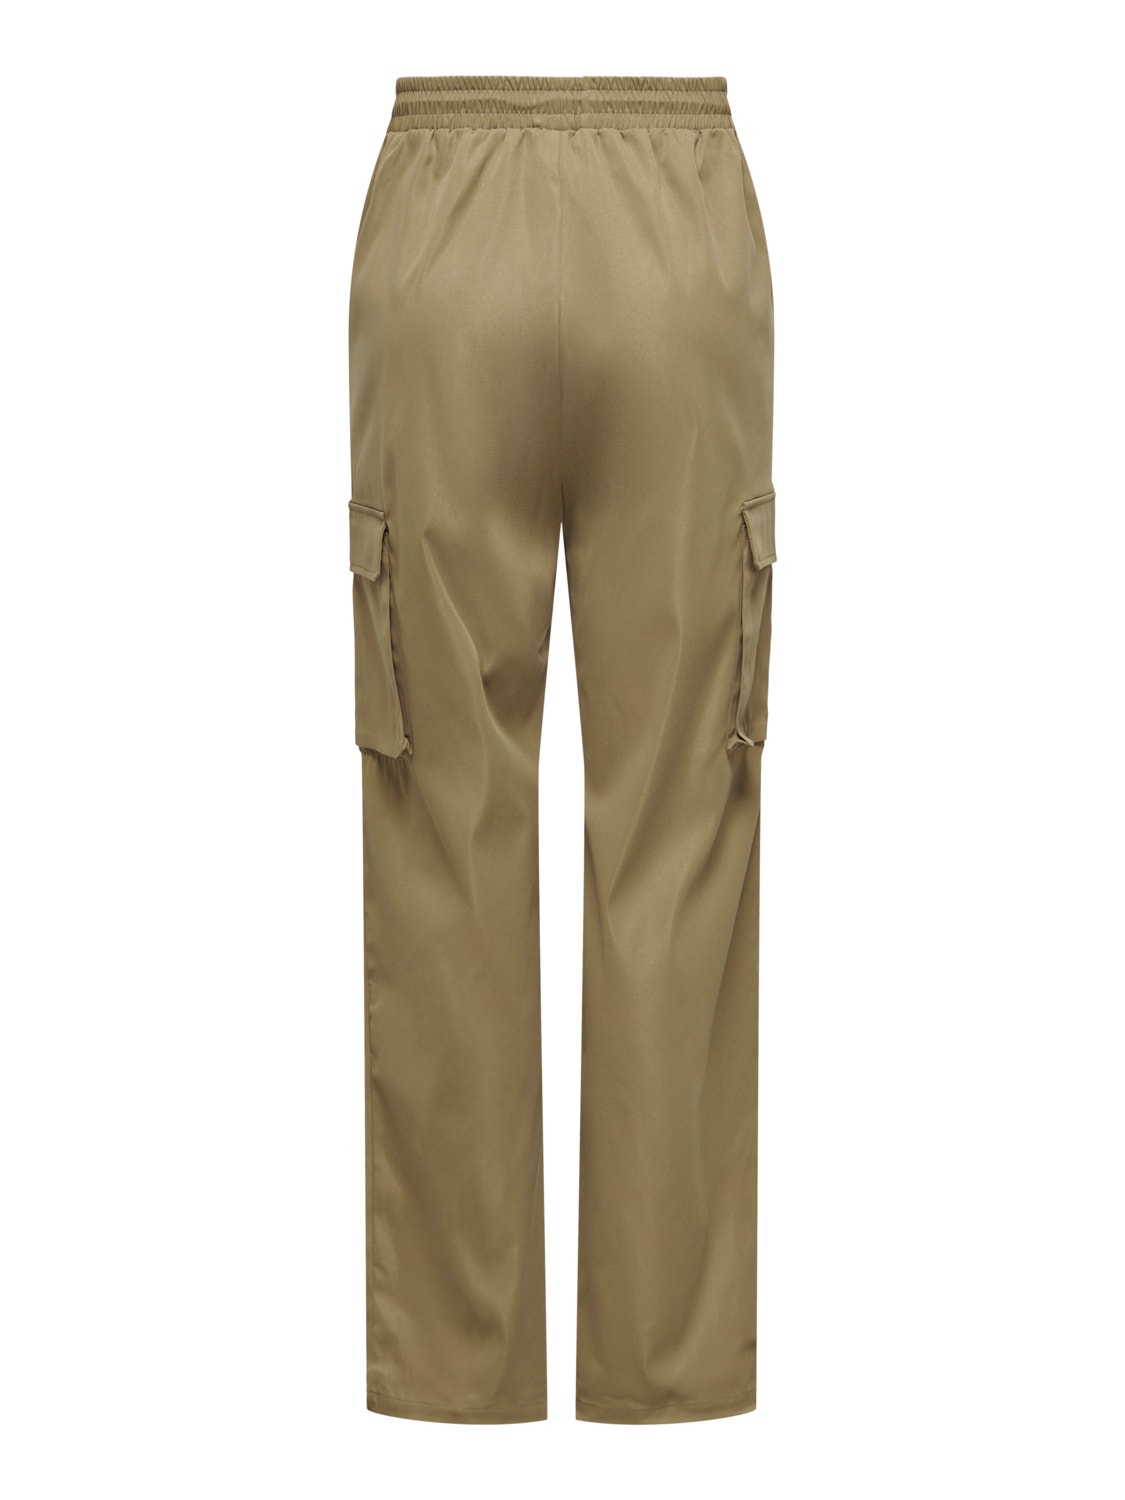 ONLY Cargo Pants With Strings -Beech - 15301004